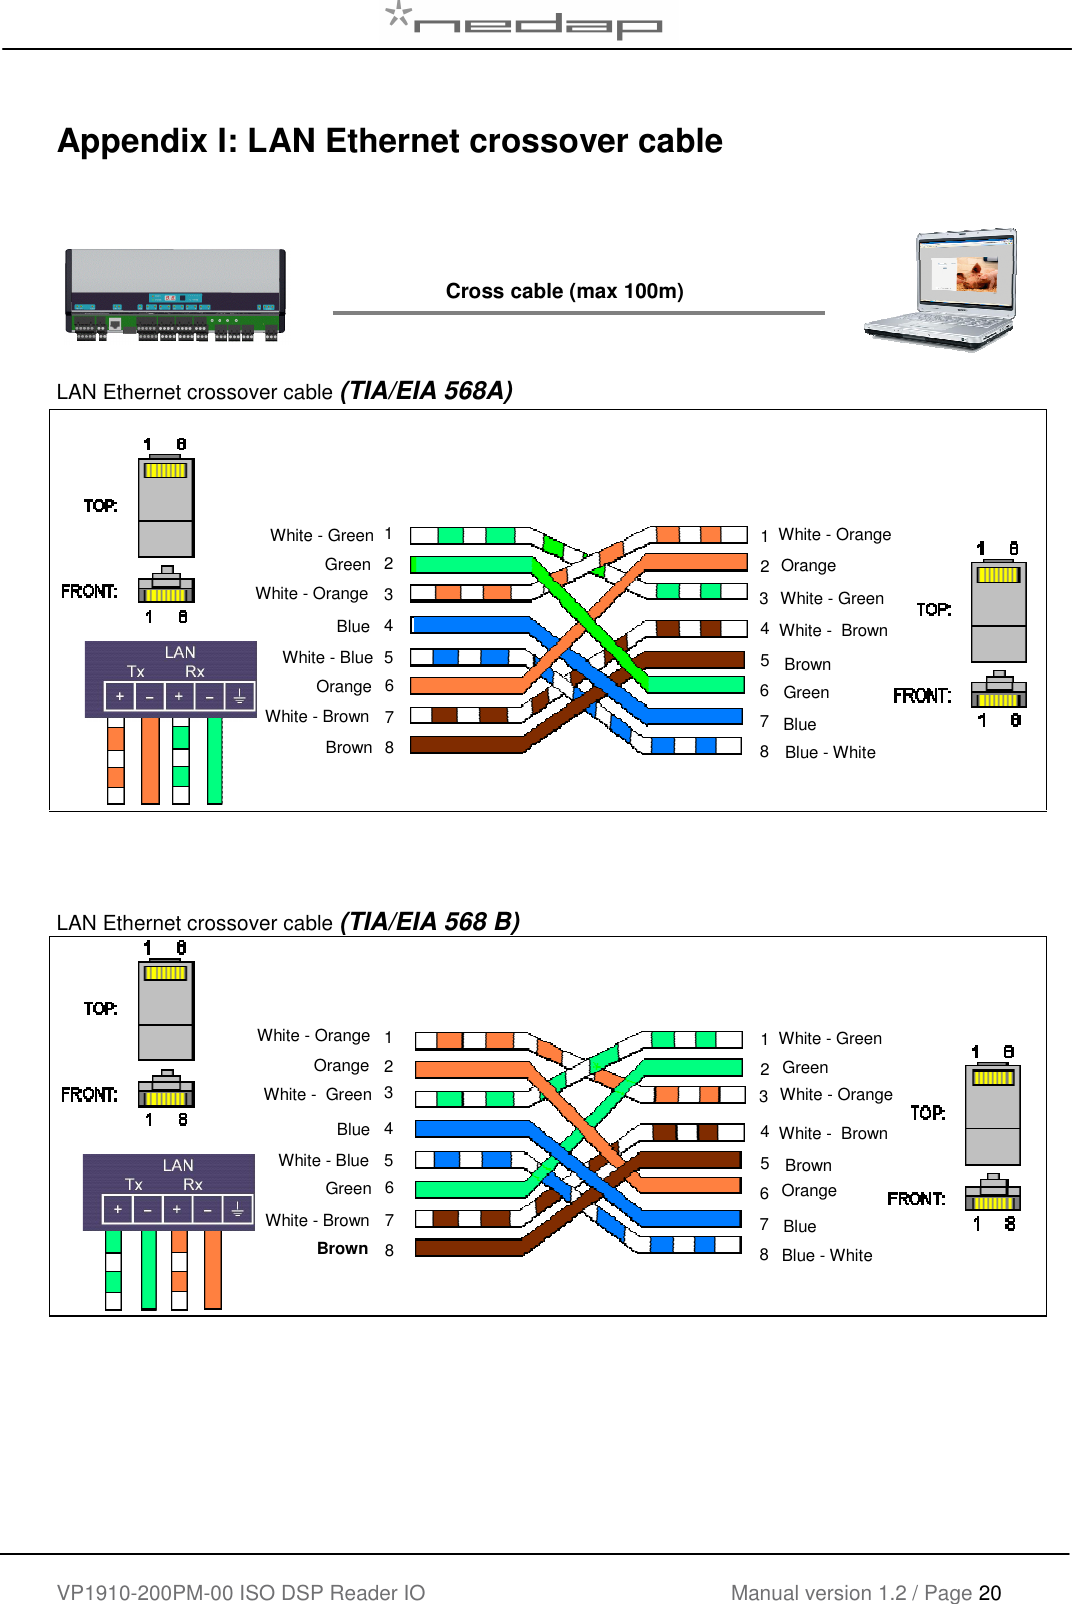    VP1910-200PM-00 ISO DSP Reader IO Manual version 1.2 / Page 20    Appendix I: LAN Ethernet crossover cable         LAN Ethernet crossover cable (TIA/EIA 568A)       LAN Ethernet crossover cable (TIA/EIA 568 B)       White - Green White - Blue White - Orange White - Green Brown 1 2324 56 786 Blue Orange White -  Brown Green 1 23 4 578  Blue - White White - Brown White - Orange Green Blue Orange  Brown 1 23 4 56 786 Blue White - Green White - Orange Brown Green White -  Brown Orange 1 23 4 578  Blue - White White - Brown White - Orange White -  Green White - Blue Orange Blue Green  Brown Cross cable (max 100m) 